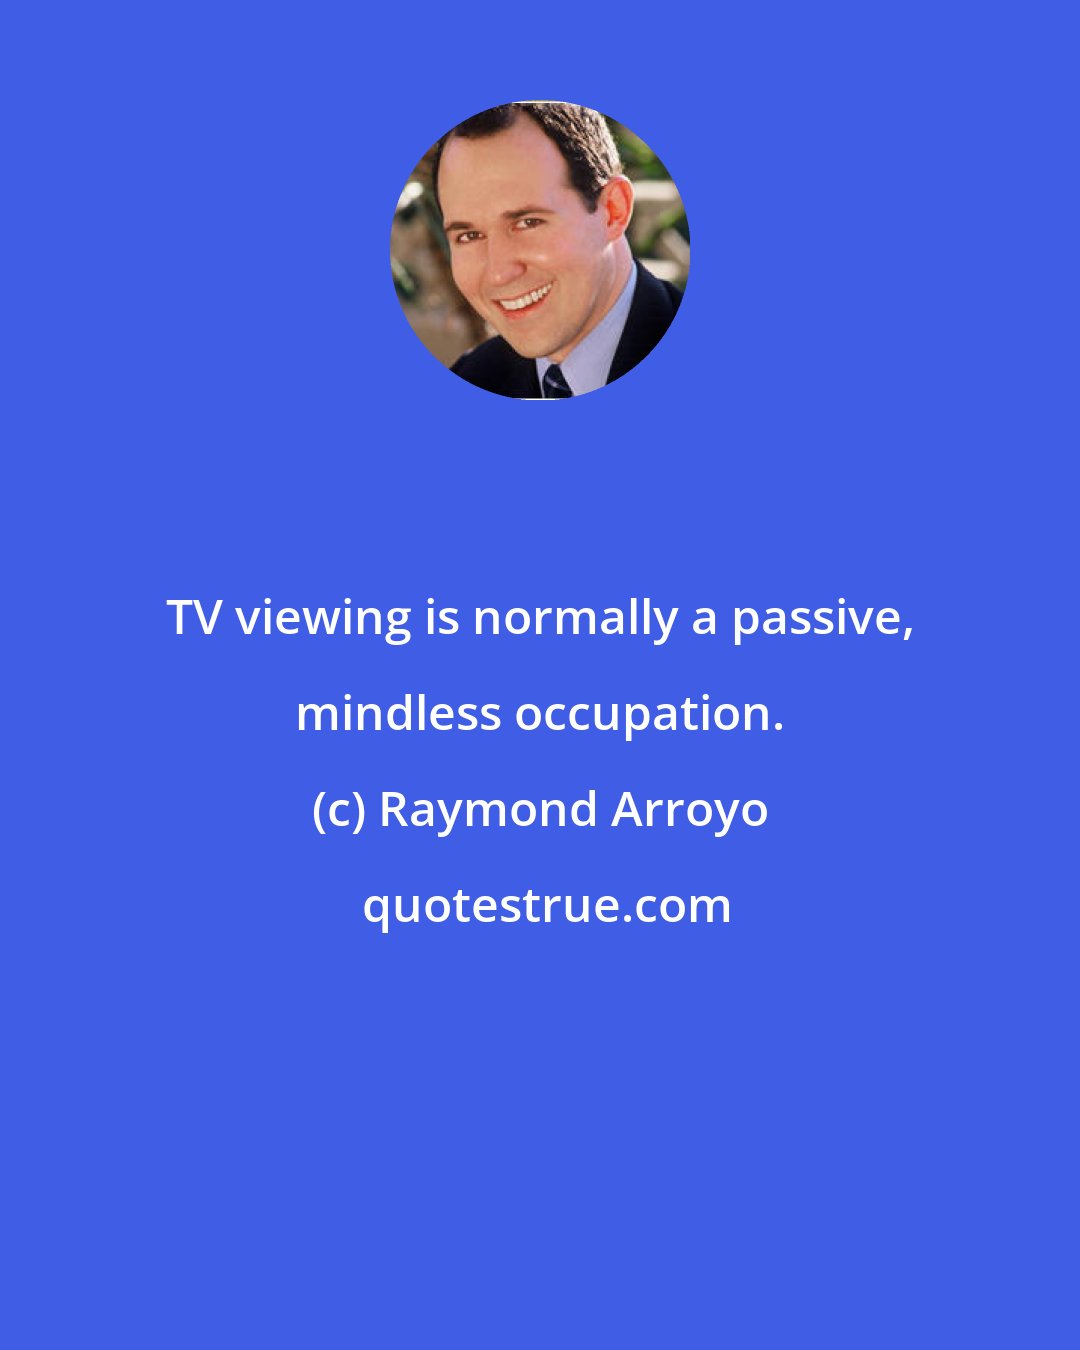 Raymond Arroyo: TV viewing is normally a passive, mindless occupation.